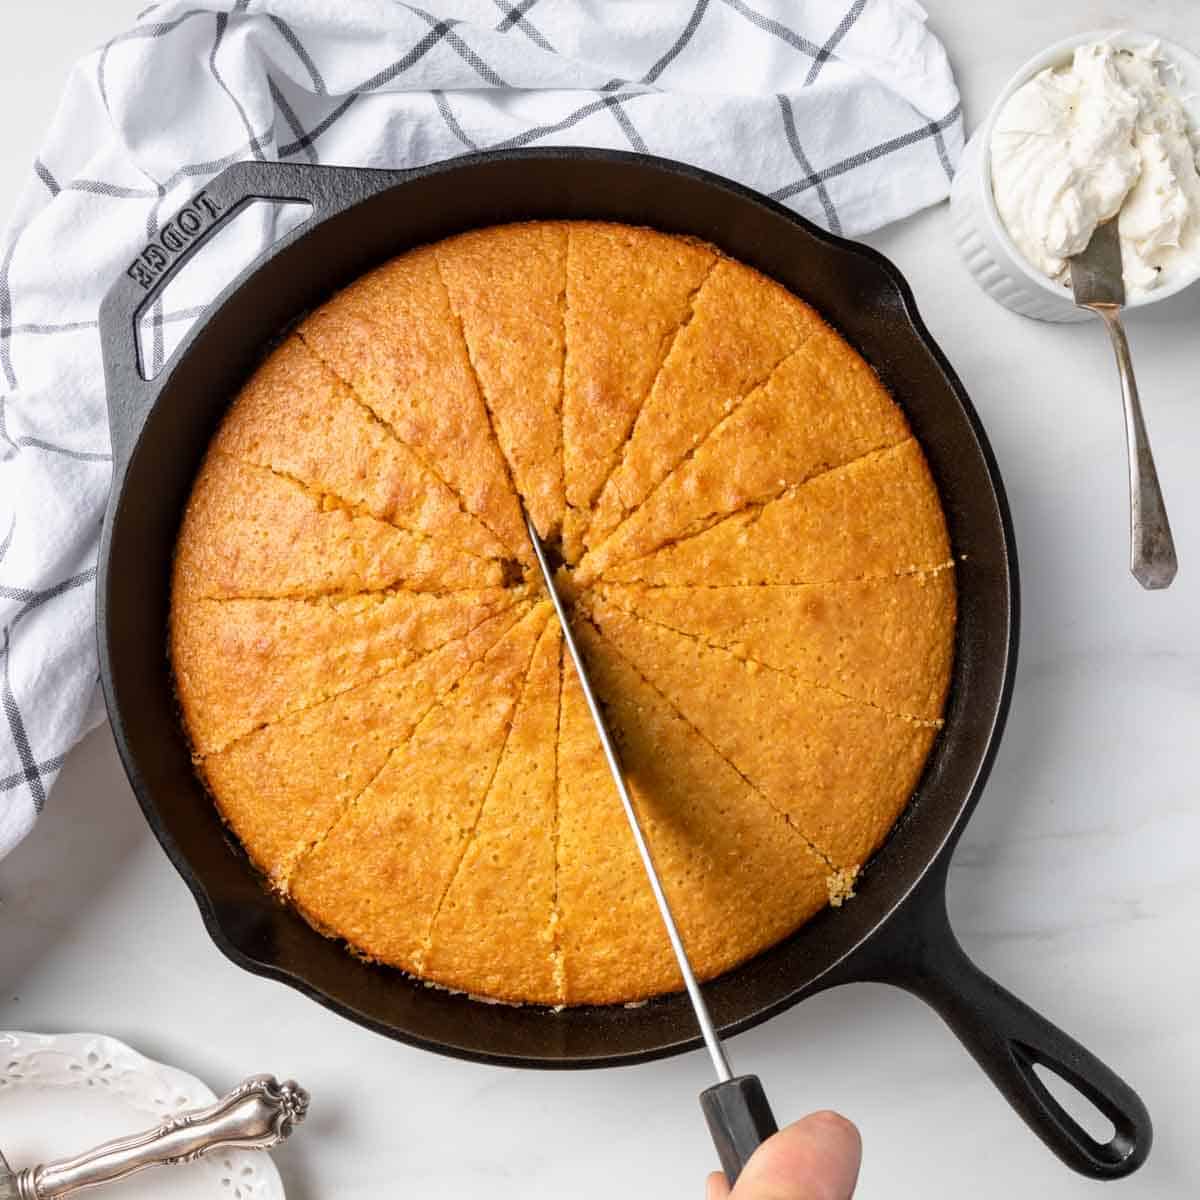 Slicing the sweet skillet cornbread into wedges